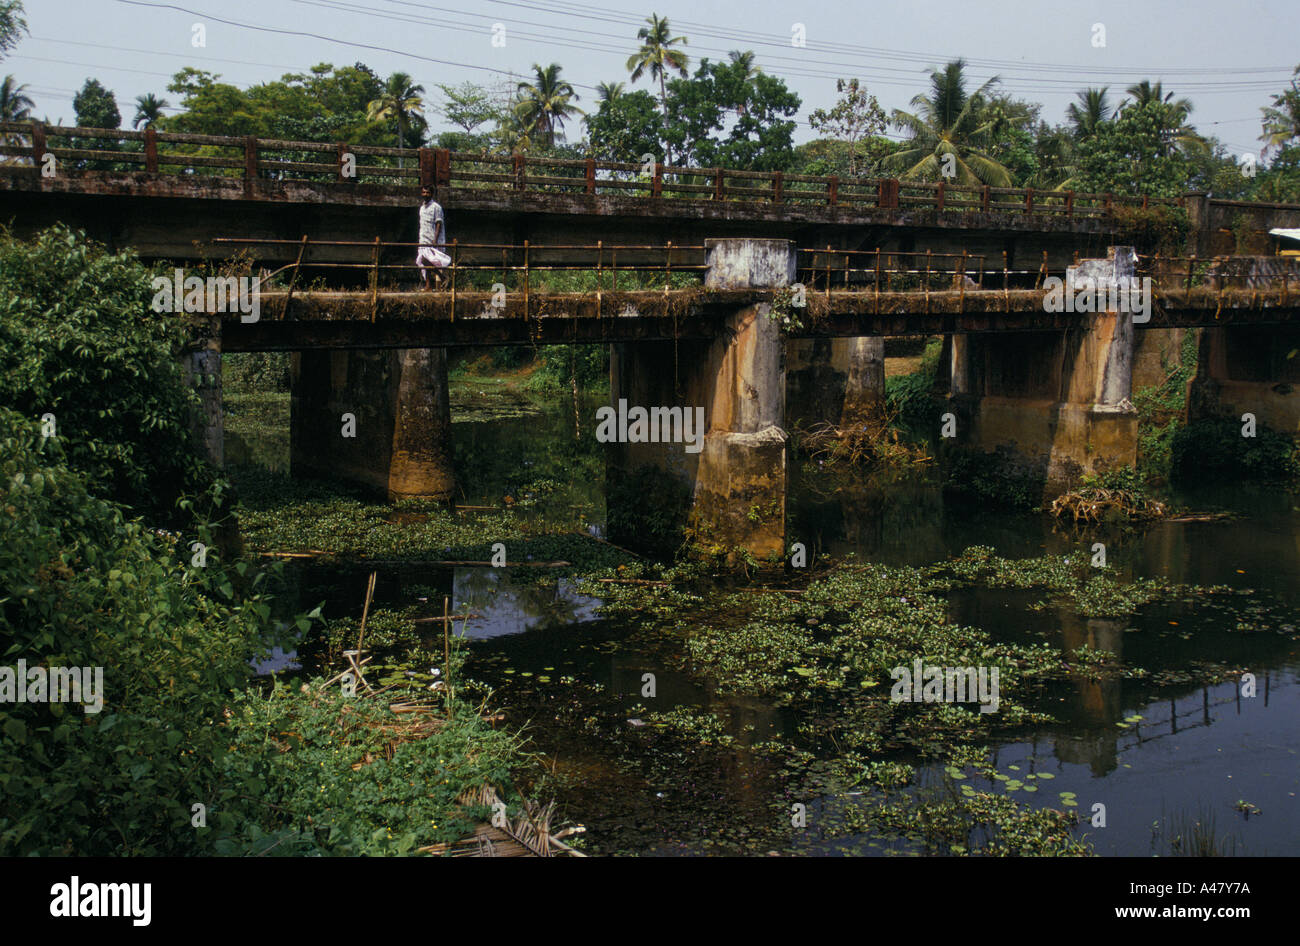 A man dressed in a lunghi walks across a bridge near the village of Aymenam that crosses the Backwaters of Kerala, India Stock Photo